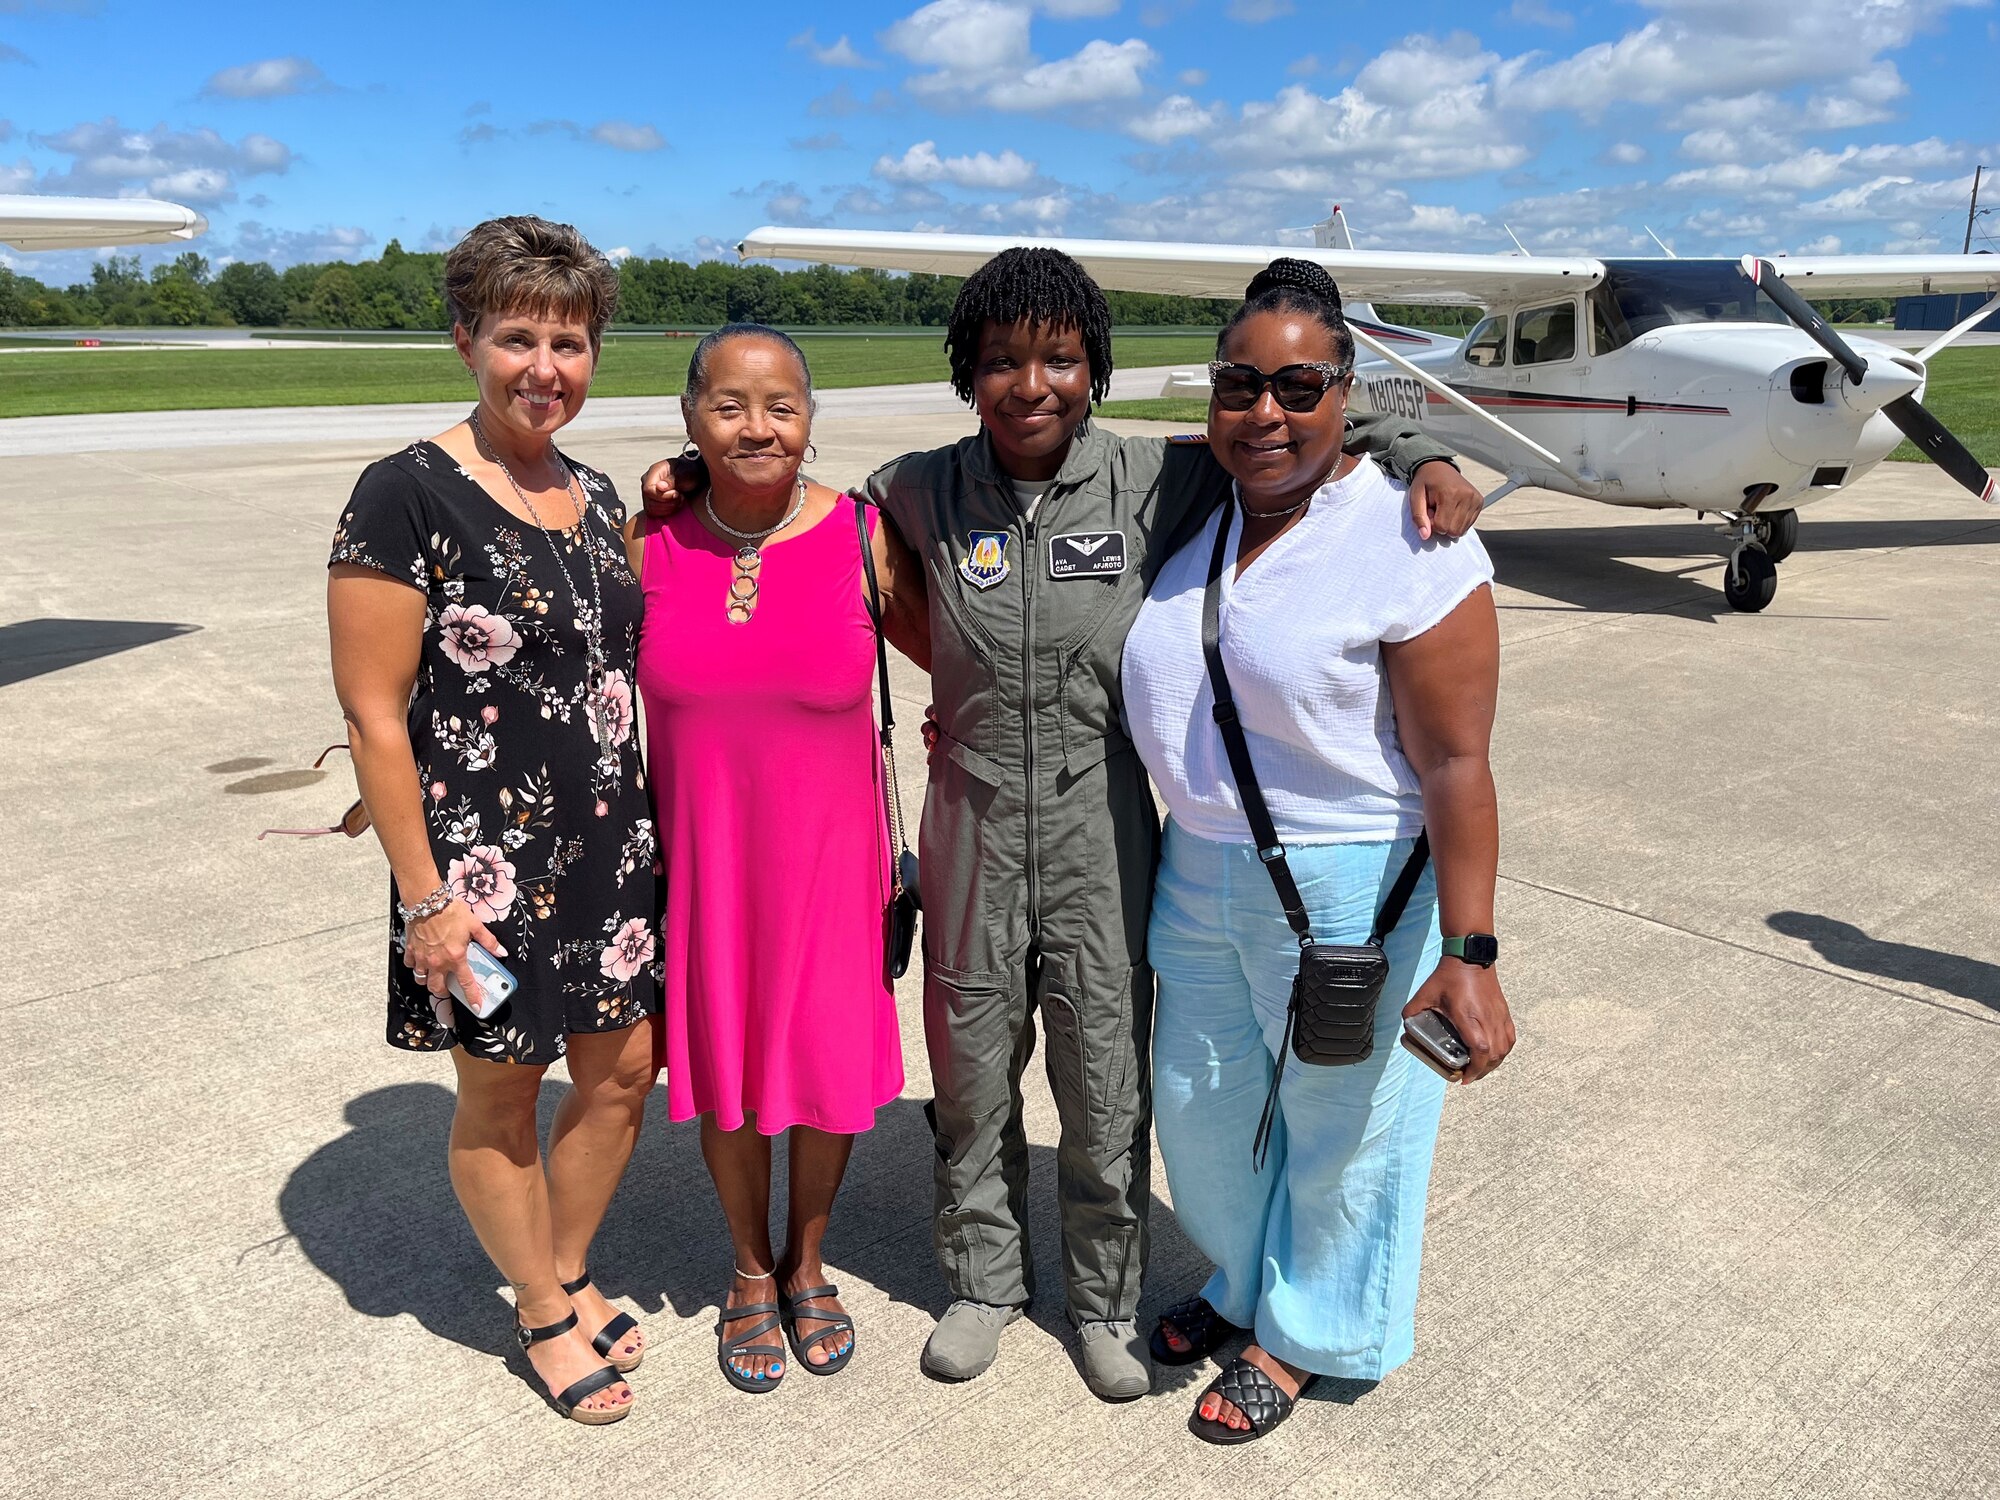 Ava Lewis, an Air Force Junior ROTC cadet, joins her mother, Angela, her grandmother, Cheryl, and her Senior Aerospace Science Instructor, retired U.S. Air Force Col. Gina Humble, for a photo just prior to flying a Cessna 172 aircraft at Marion Municipal Airport, Indiana on Aug. 4, 2022.  Lewis is a graduate of the AFJROTC Flight Academy program, an eight-week aviation course that gives cadets the opportunity to earn their Private Pilot’s Certification.